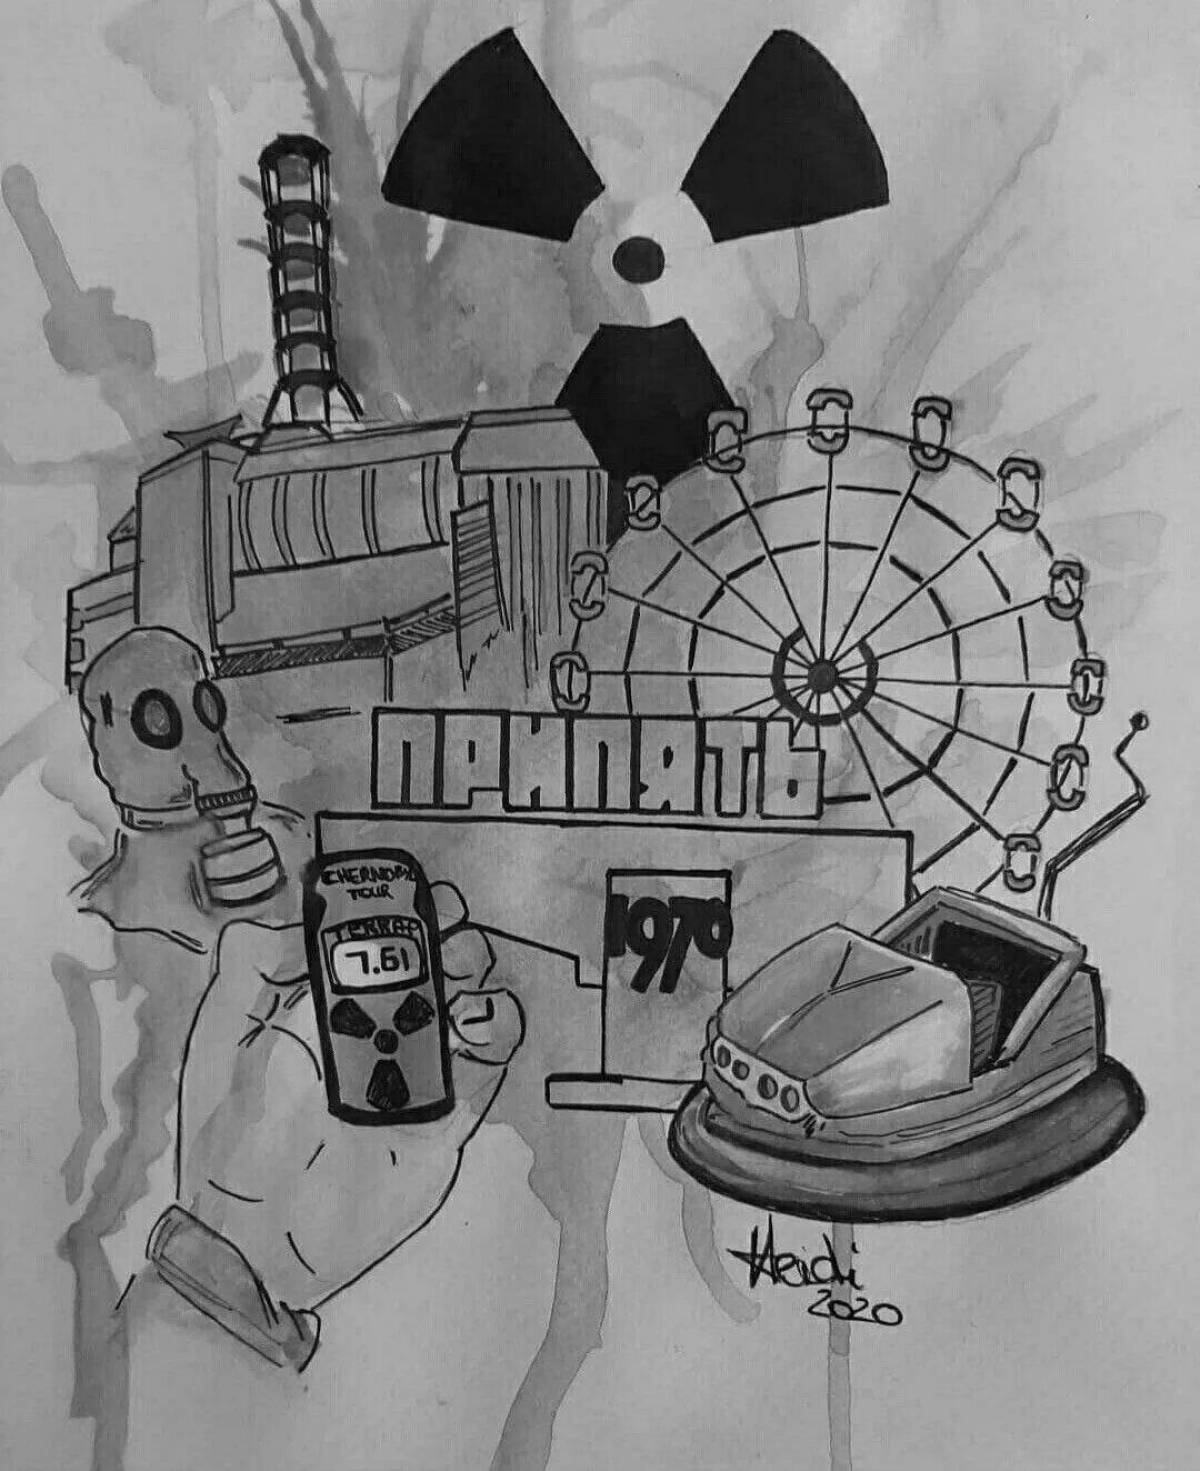 Colouring page delightful Chernobyl station